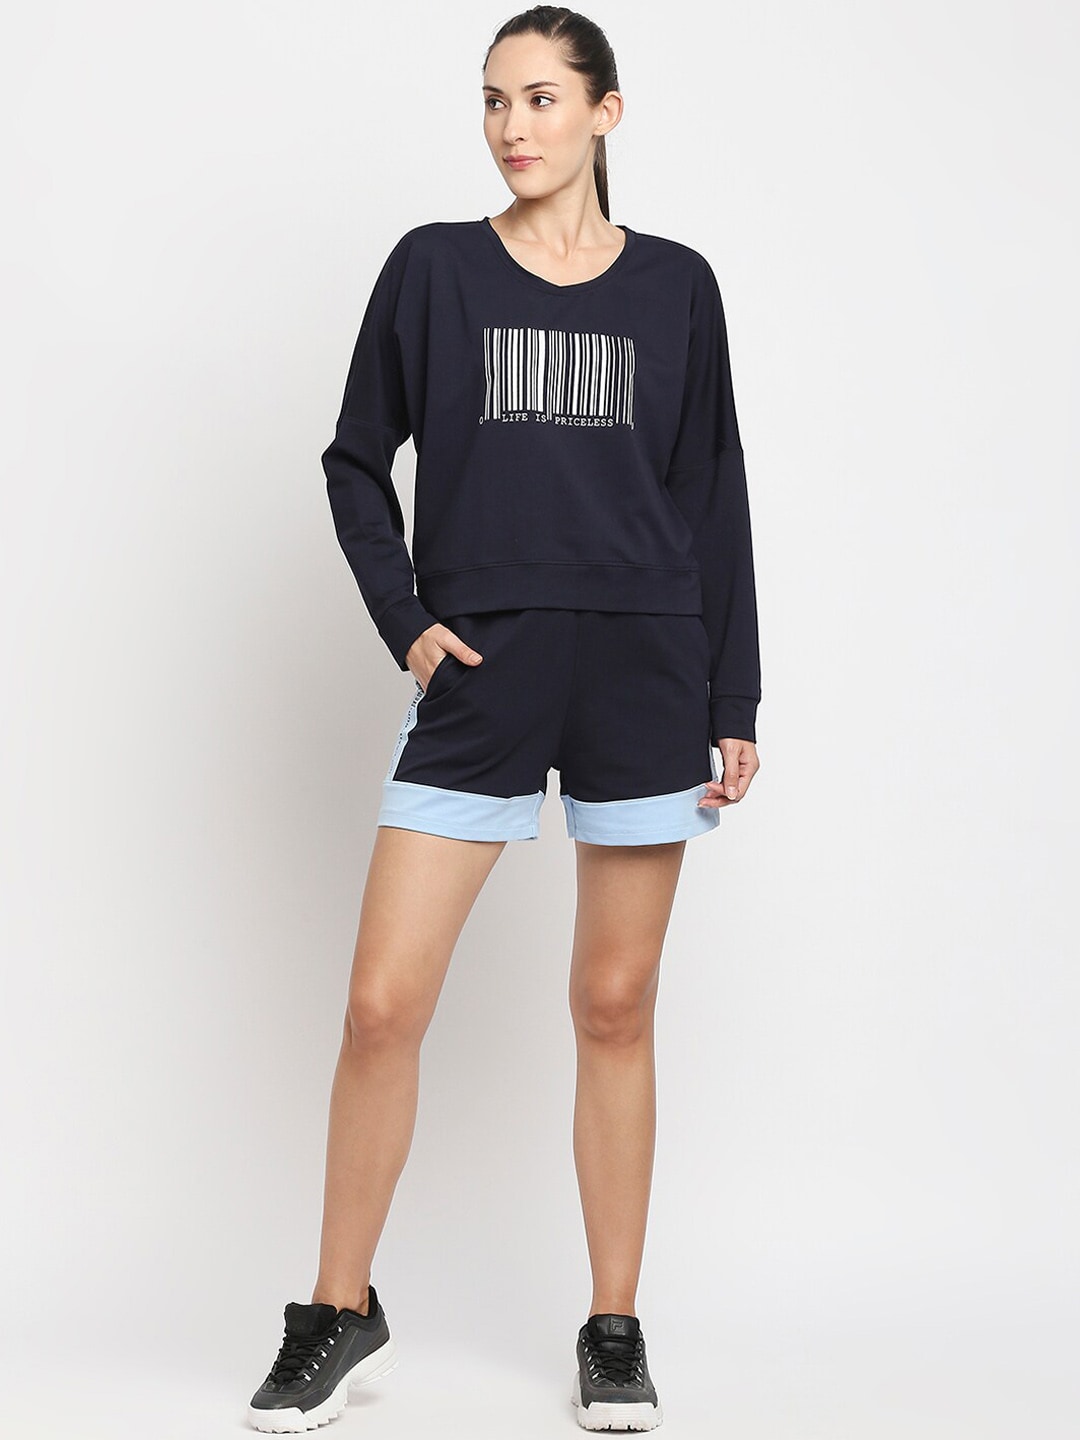 Tuna London Women Navy Blue Printed Sweat Shirt With Shorts Price in India